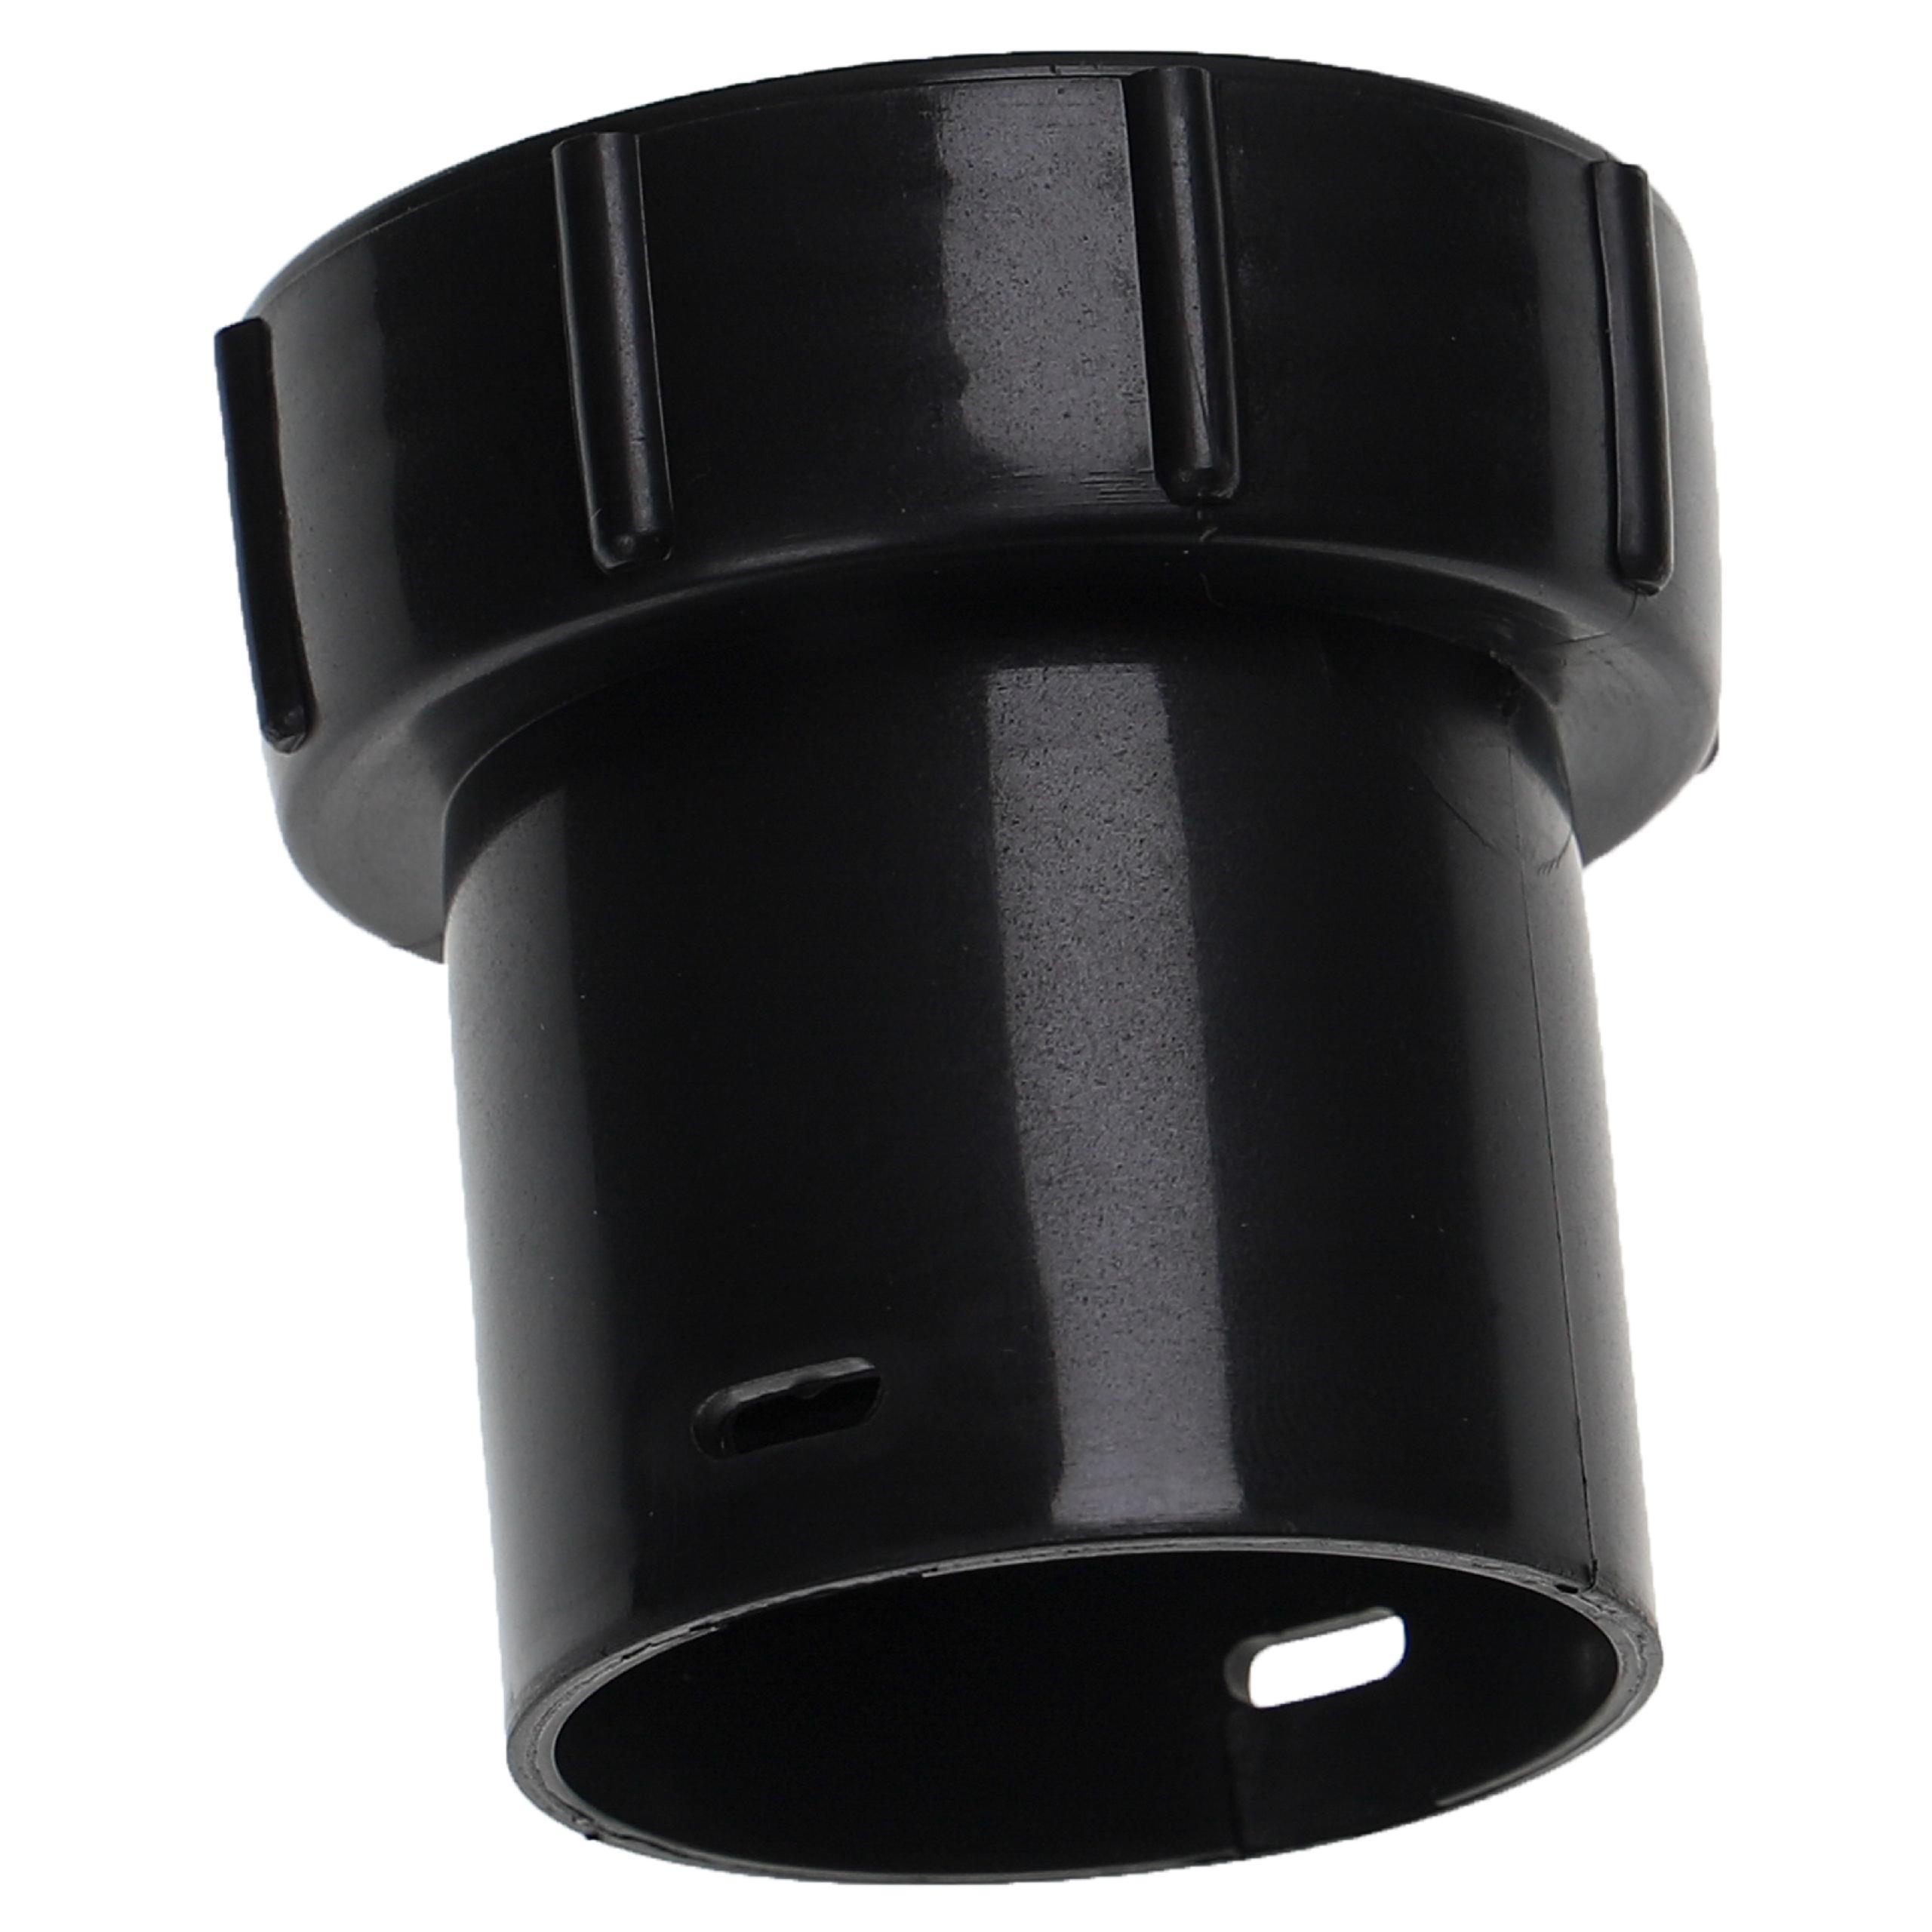 Hose Adapter for Numatic / Nilfisk Charles Vacuum Cleaner u.a. - 32 mm Round Connector, Plastic